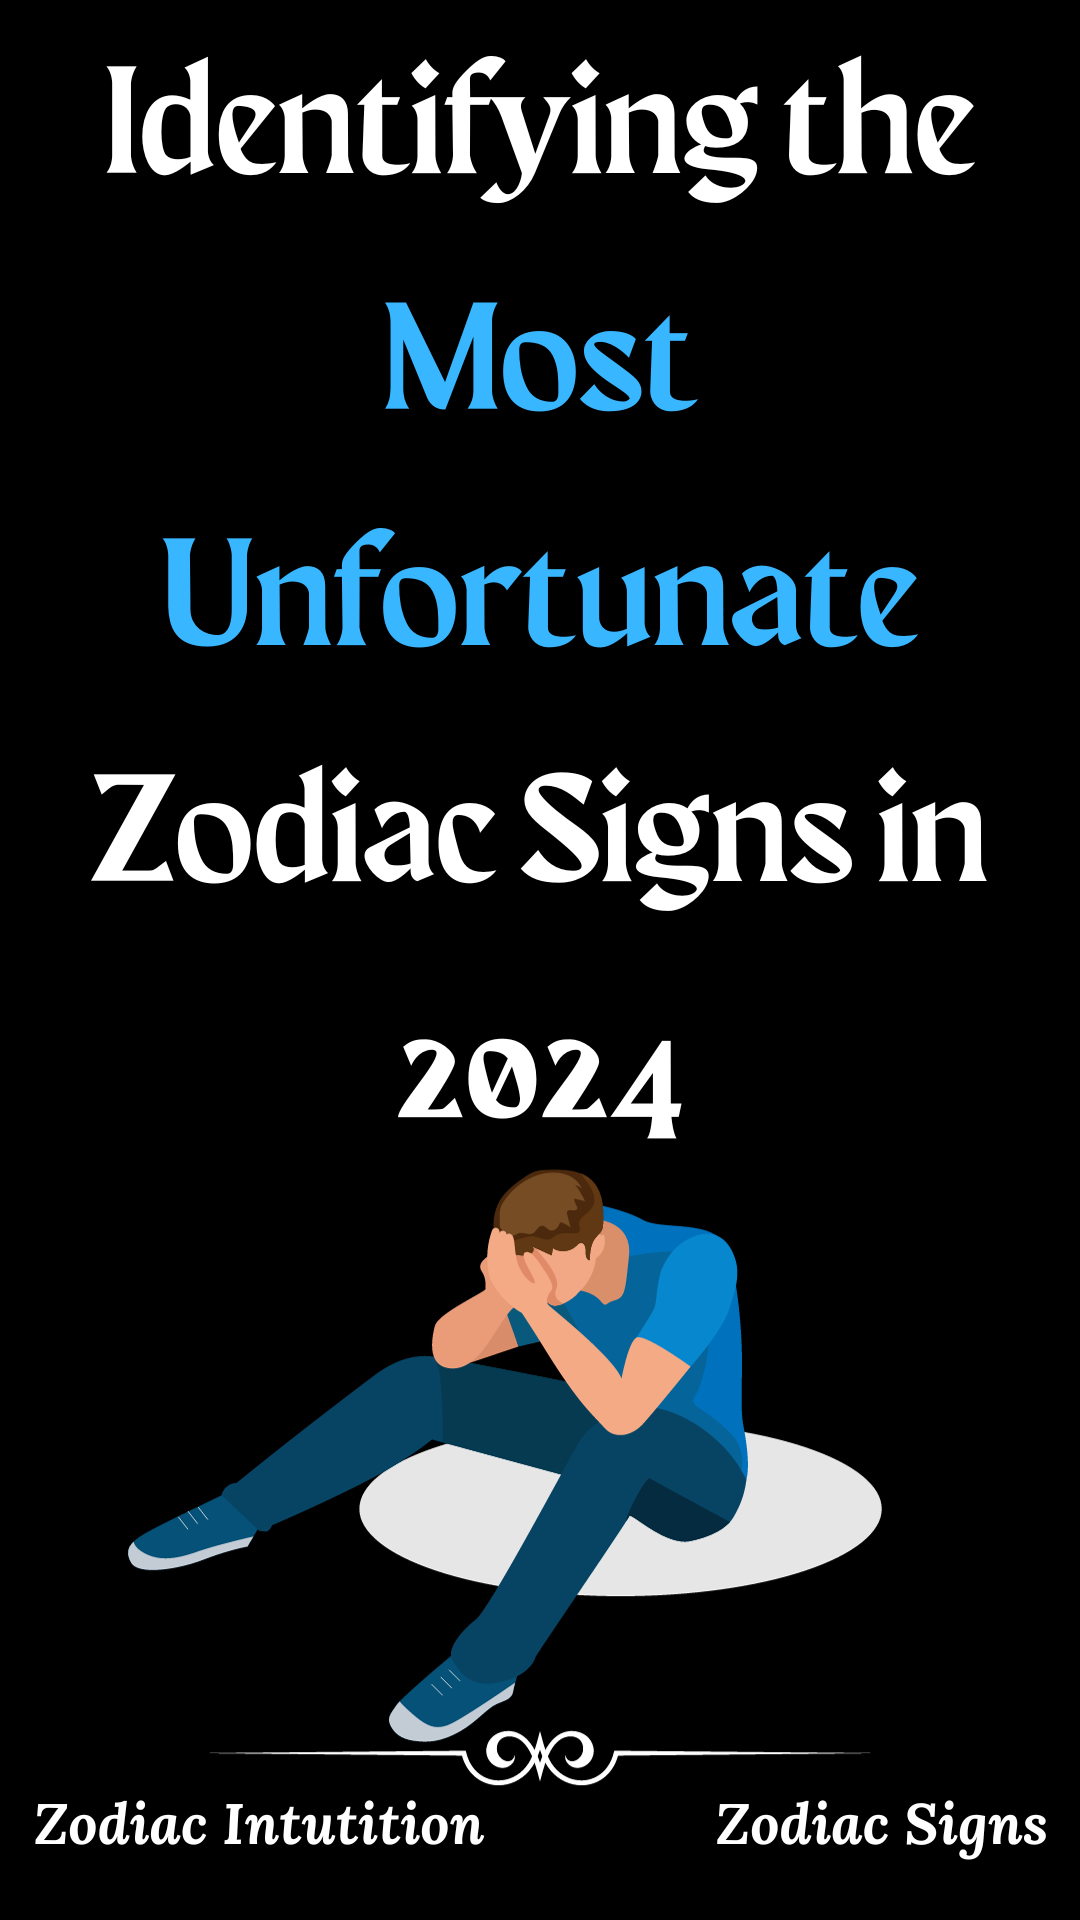 Identifying the Most Unfortunate Zodiac Signs in 2024